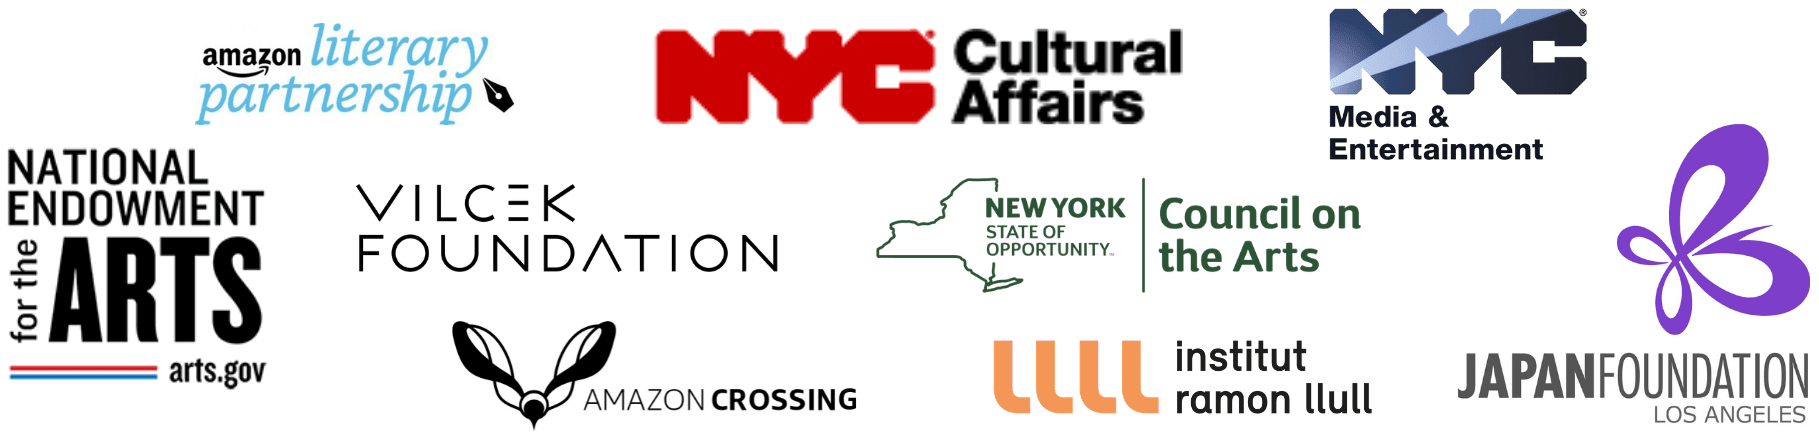 Logos of presenting sponsors: Amazon Crossing, Amazon Literary Partnership, Horace Goldsmith Foundation, Institut Ramon Llull, Japan Foundation, Los Angeles, JKW Foundation, New York City Mayor’s Office of Media and Entertainment, National Endowment for the Arts, New York State Council on the Arts, New York City Department of Cultural Affairs, and Vilcek Foundation